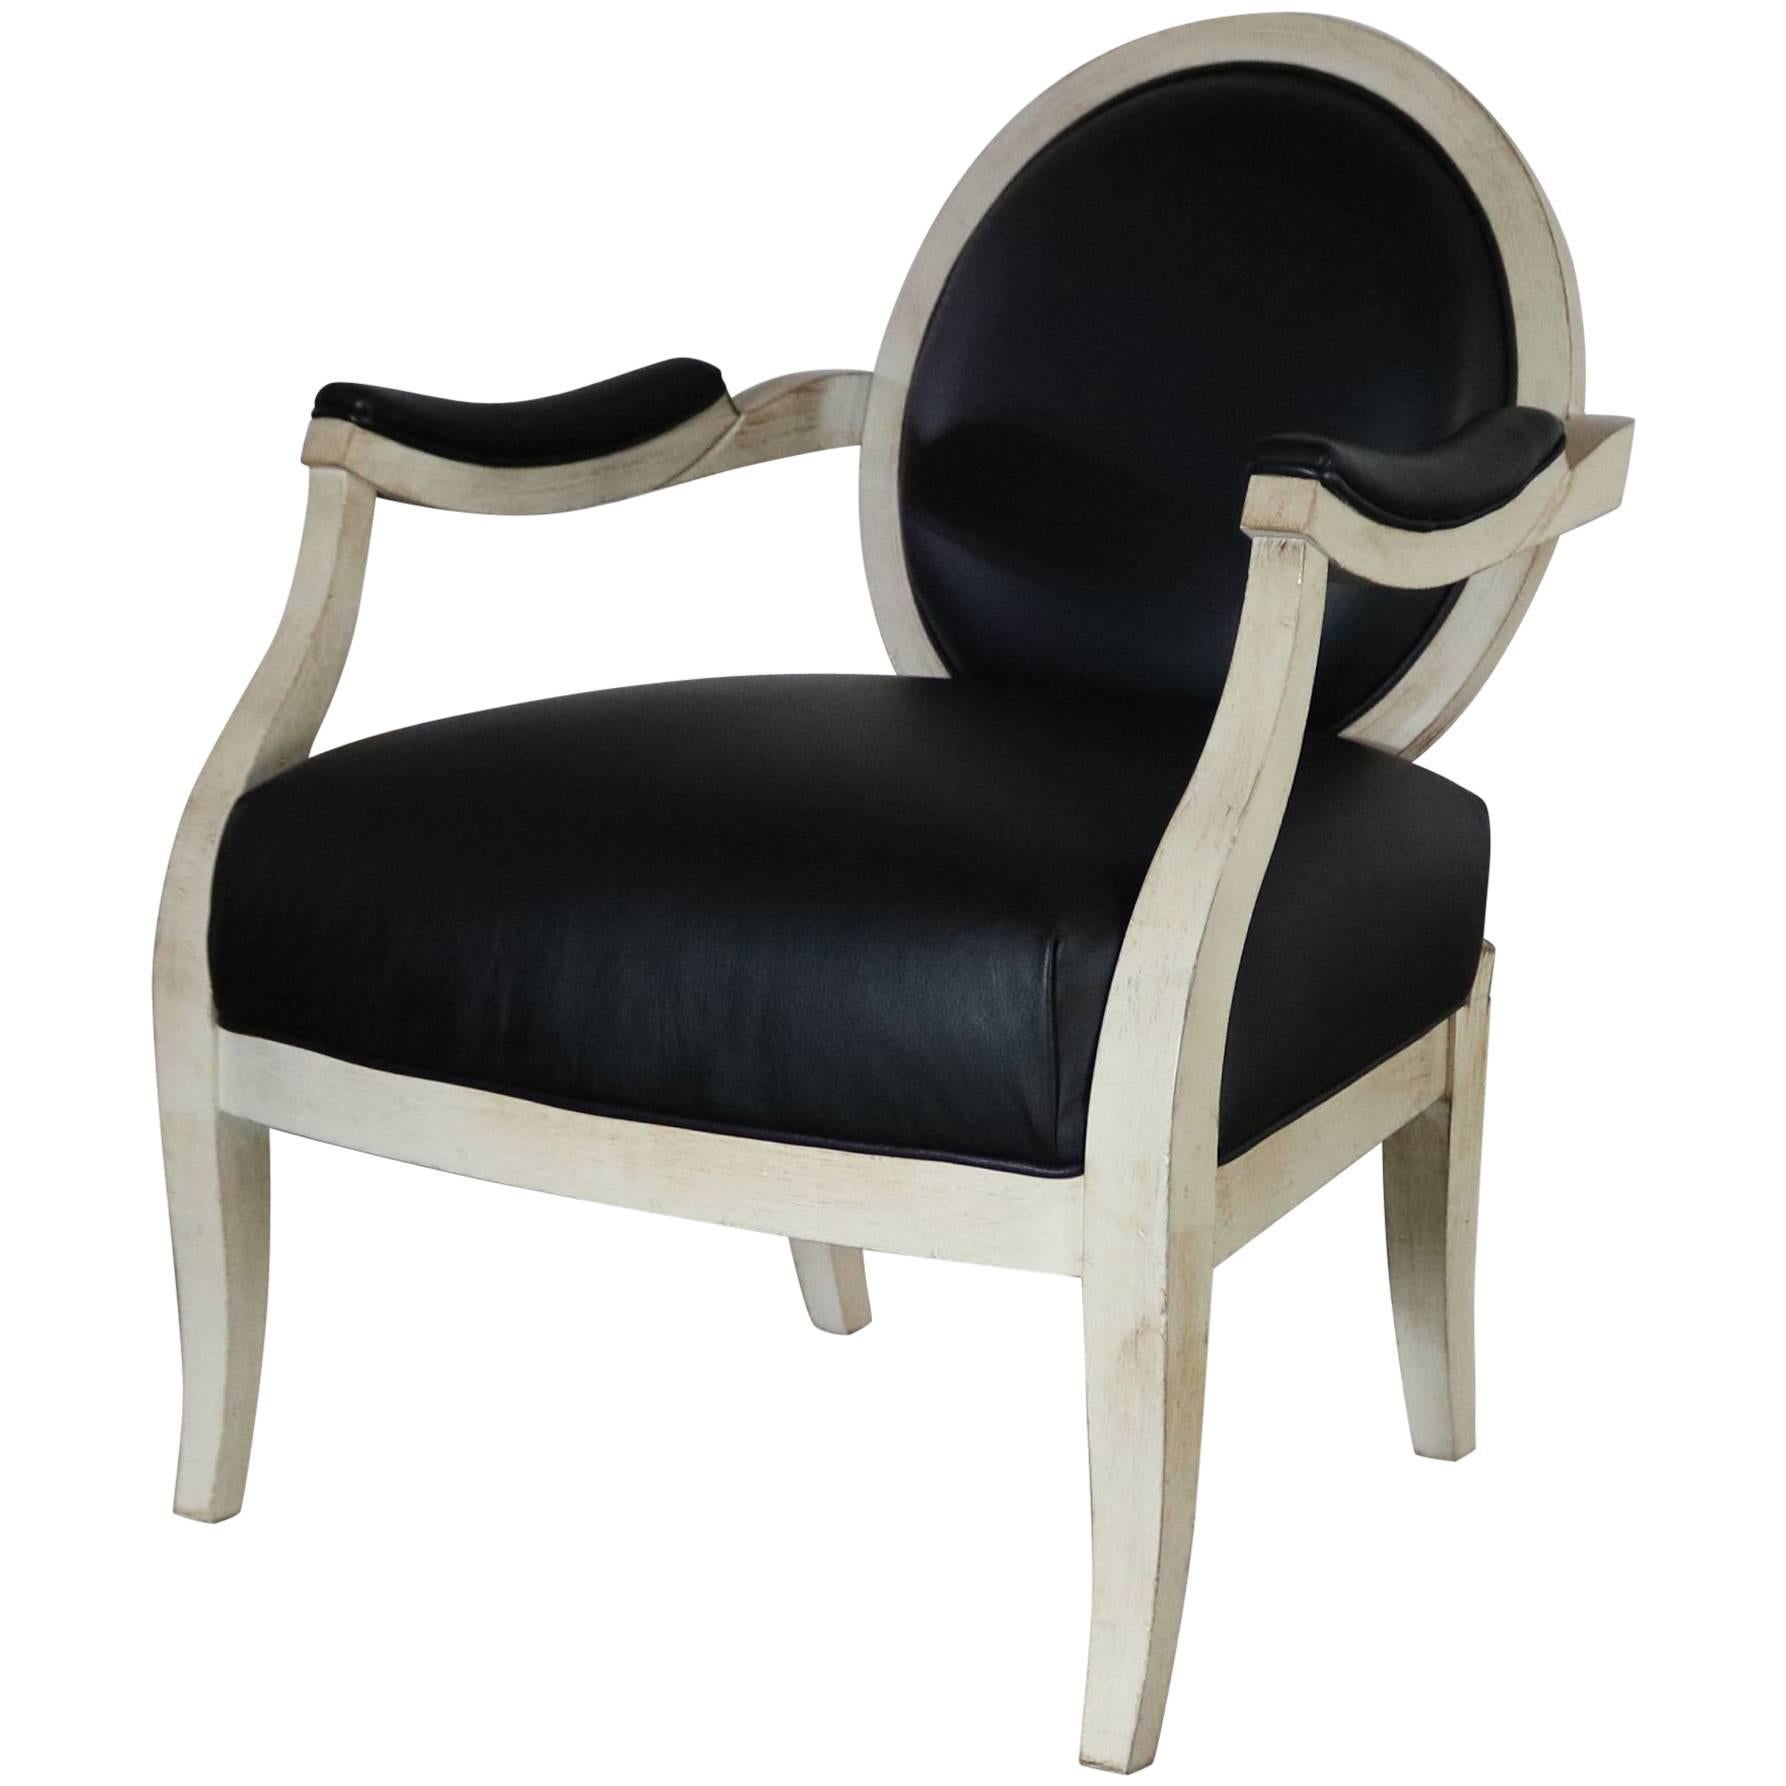 Black and Antique White Transitional Fauteuil Open-Arm Side or Accent Chair